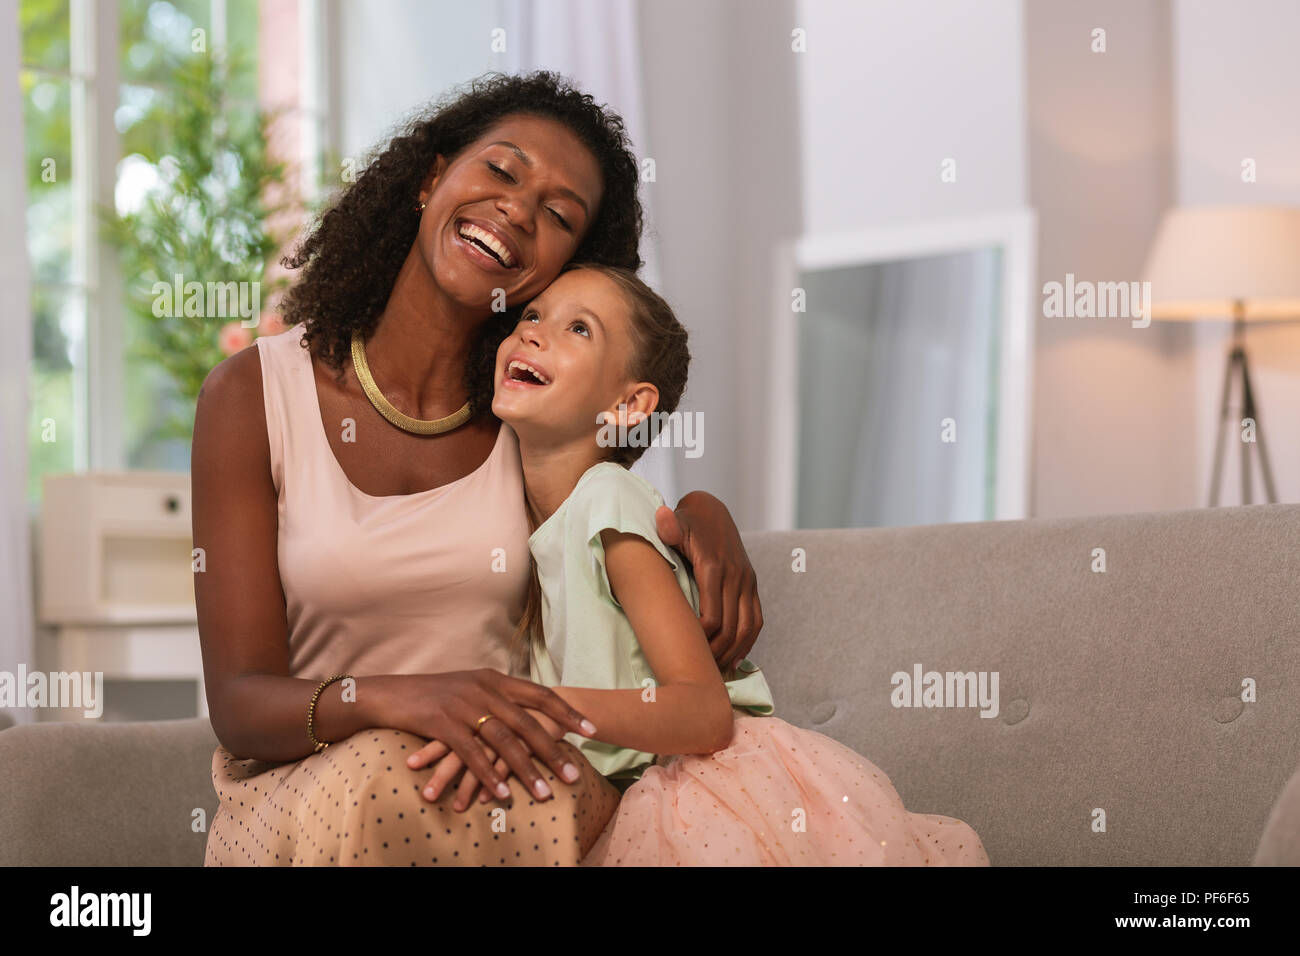 Nice cute mother and daughter being in a great mood Stock Photo